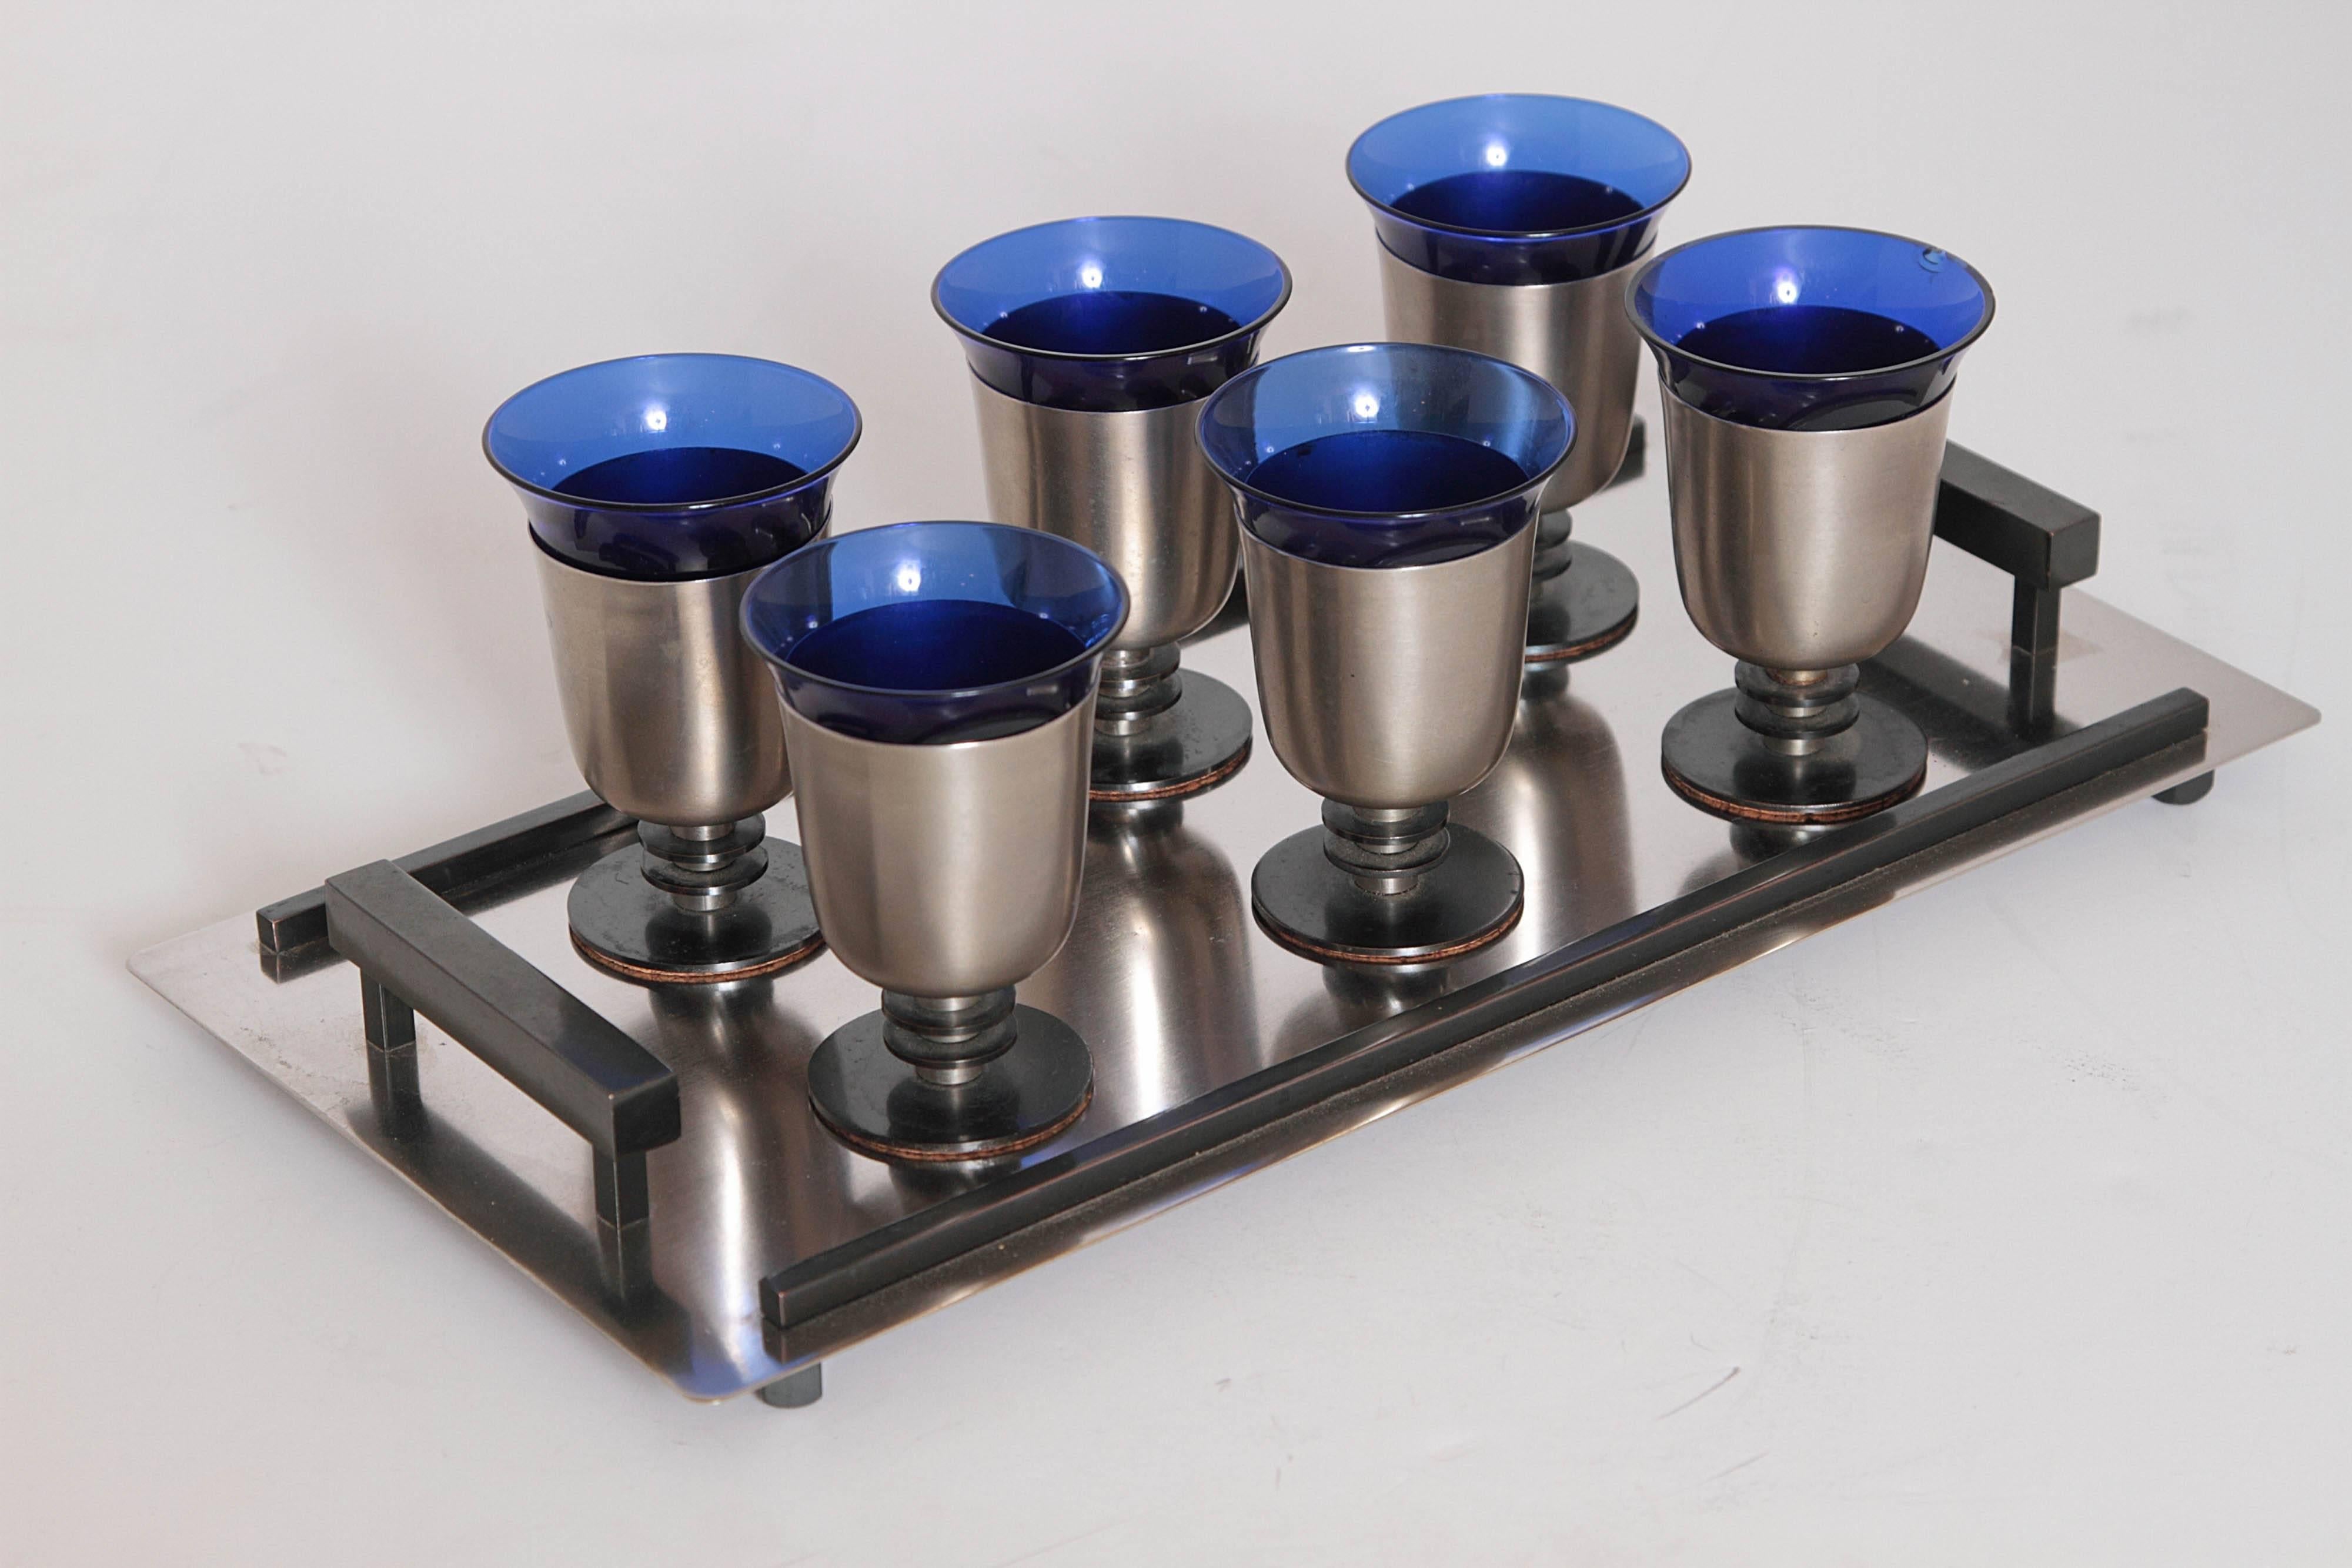 This set is typically seen in all polished chrome, occasionally copper.
Here is the original rare brushed chrome or nickel/black anodized version.
Cobalt inserts perfect, original cork base liners, original black accent.
To our knowledge, not